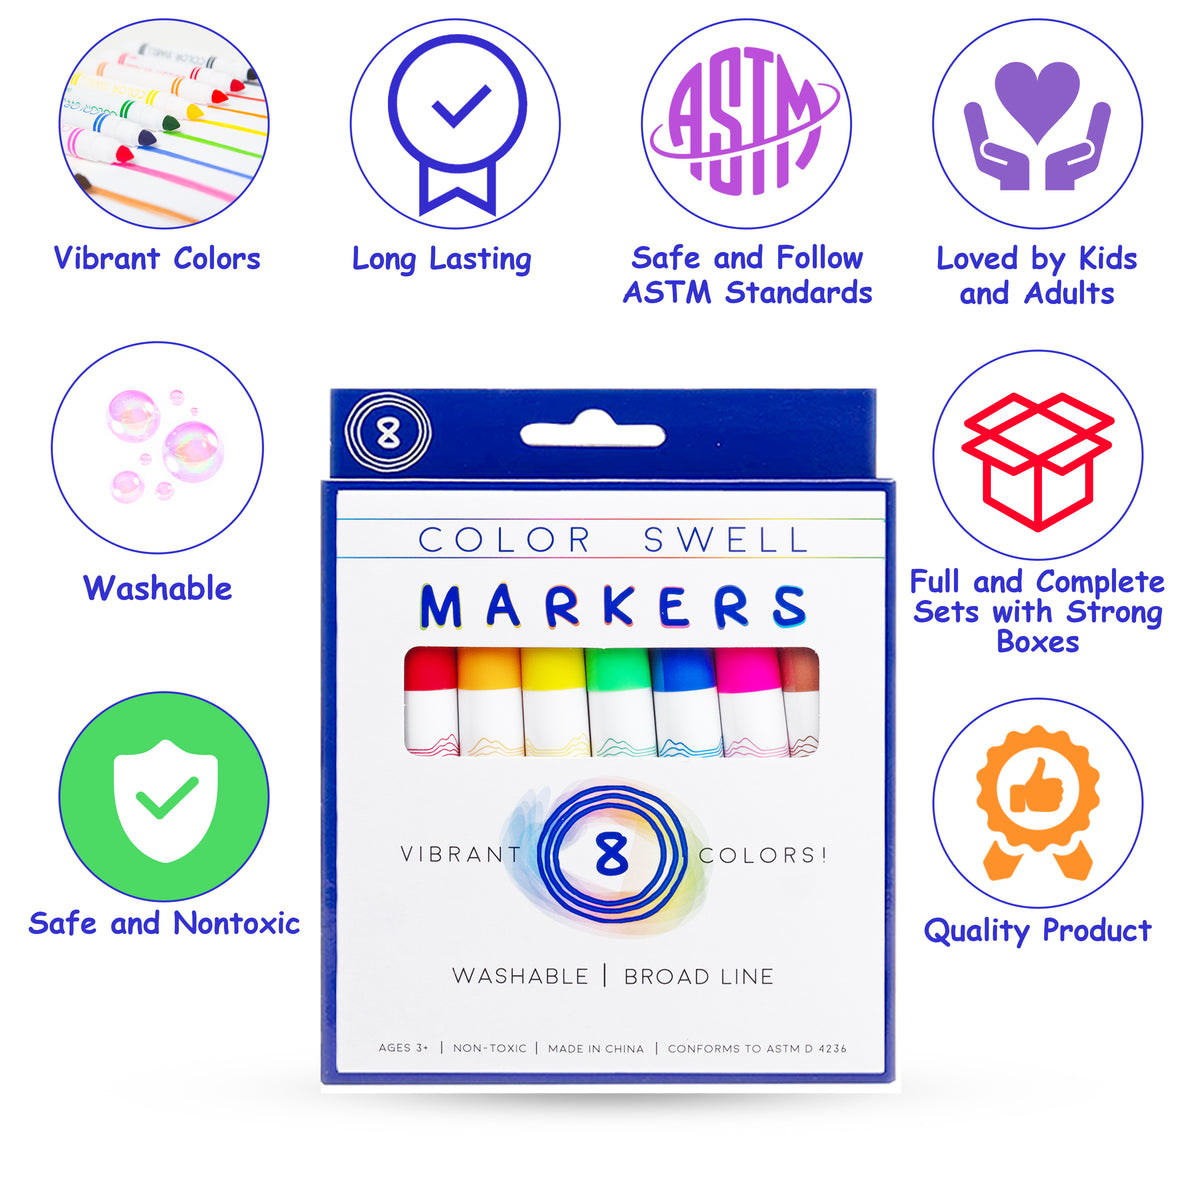 Colouring Markers For Kids